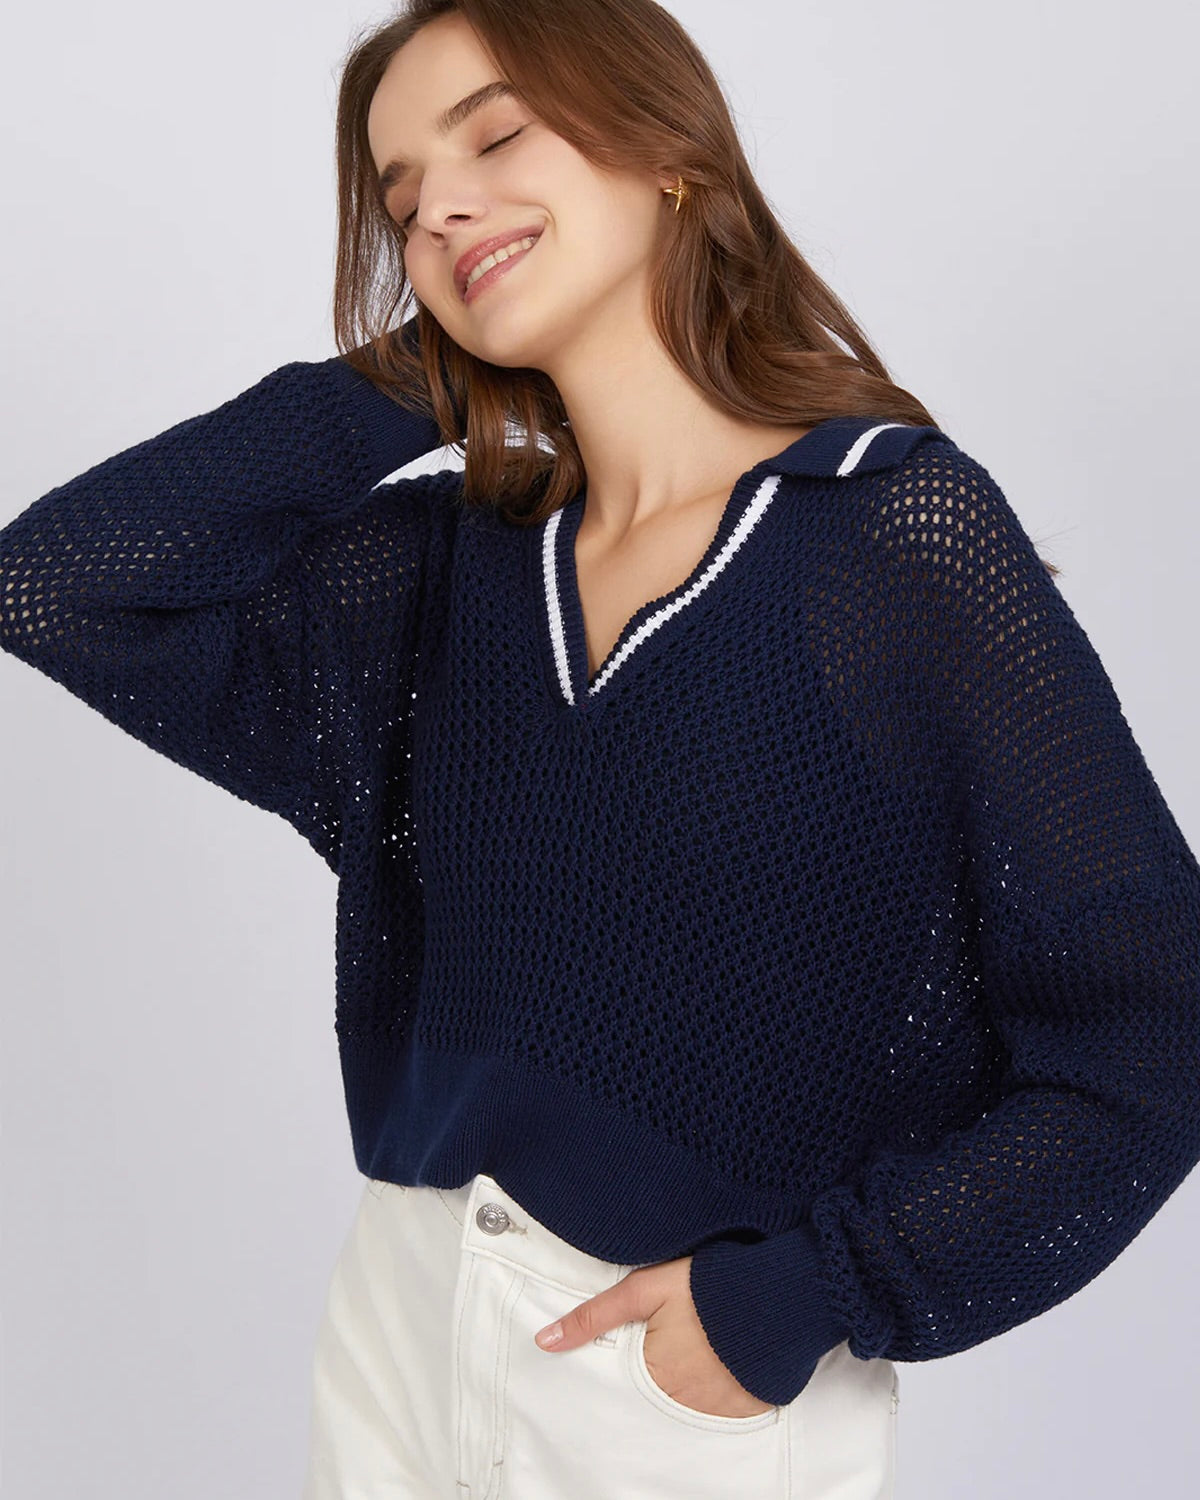 Model wearing 525 America Cara Tipping Navy Polo Pullover sweater wearing white shorts on a white background